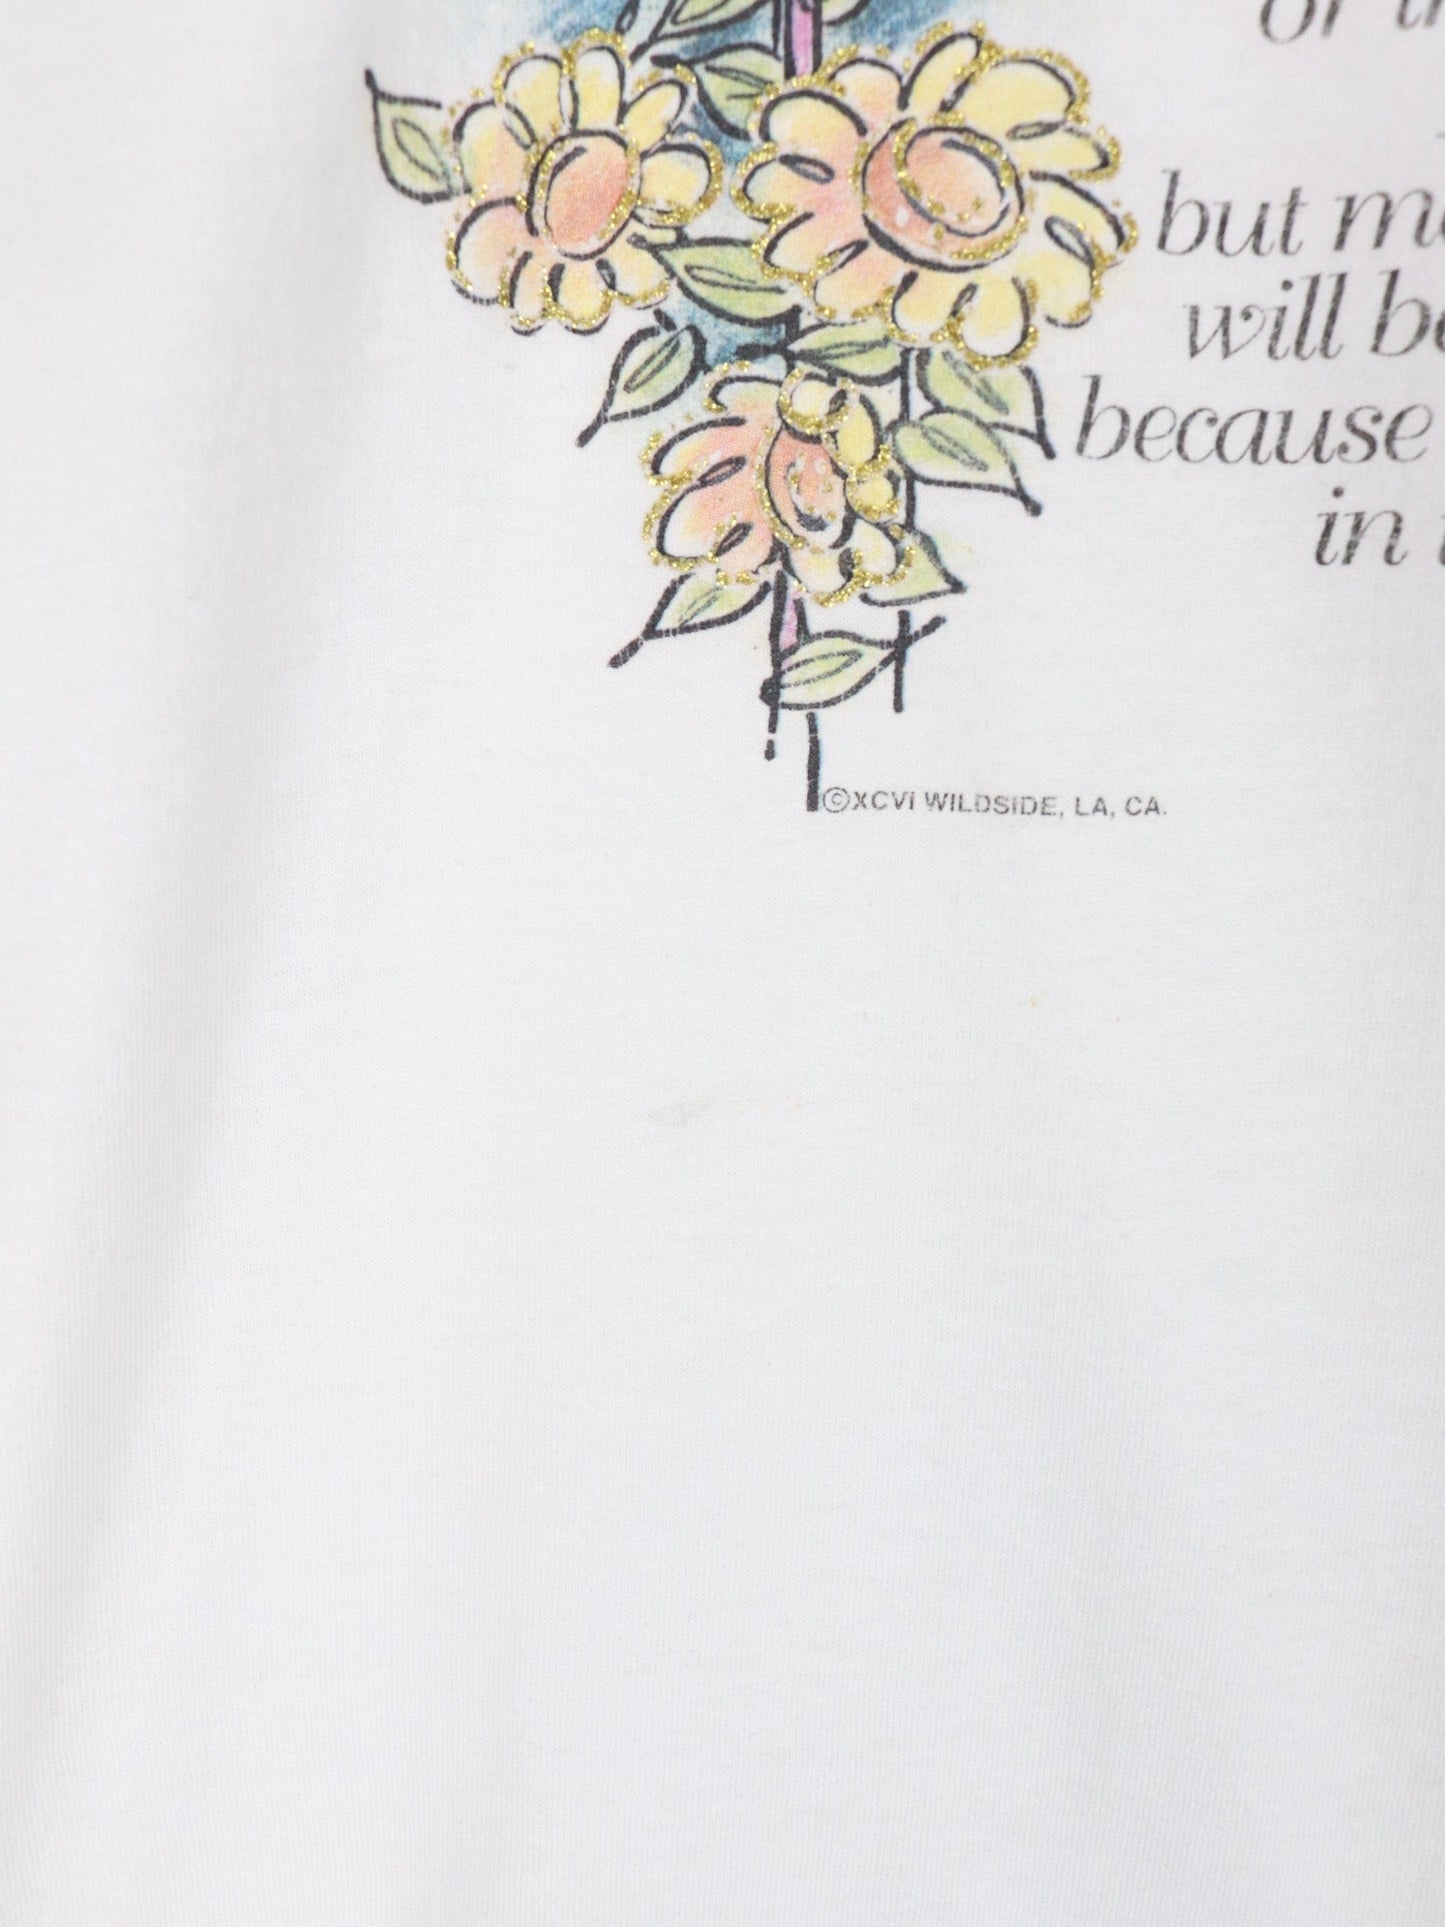 Other T-Shirts & Tank Tops Vintage Hundred Years From Now T Shirt Mens XL White Wholesome Quote 90s Floral